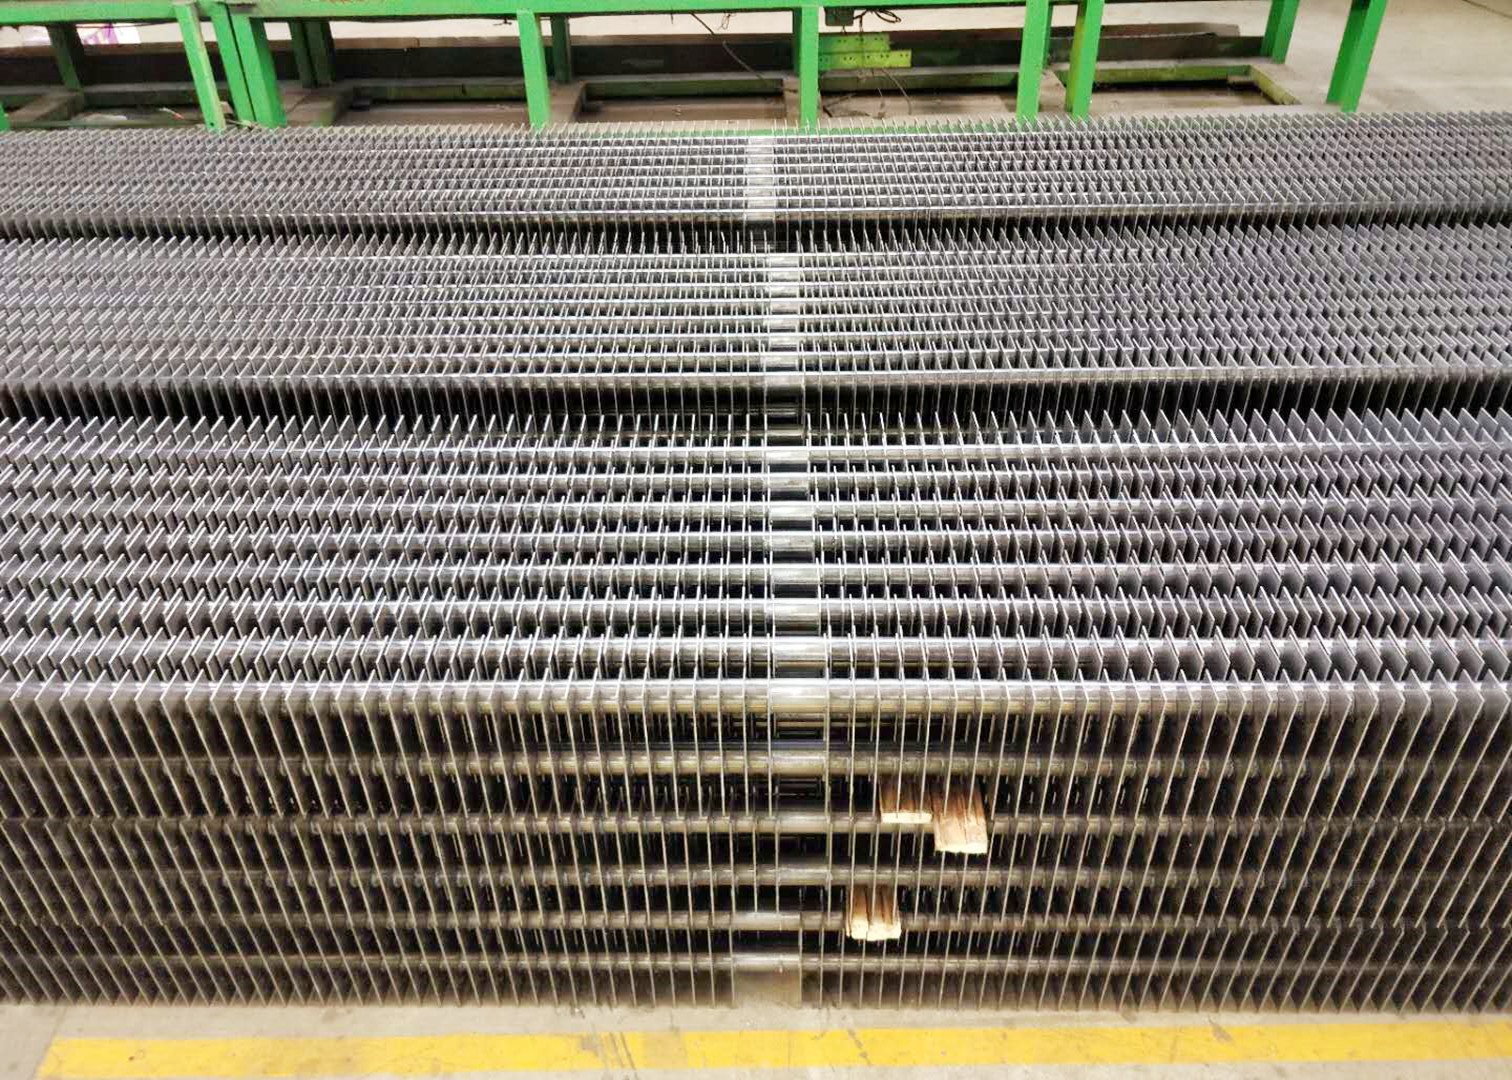 Exchange Parts HDB Boiler Finned Tube Heat Exchanger for Coal-fired Boiler of Natural Circulation